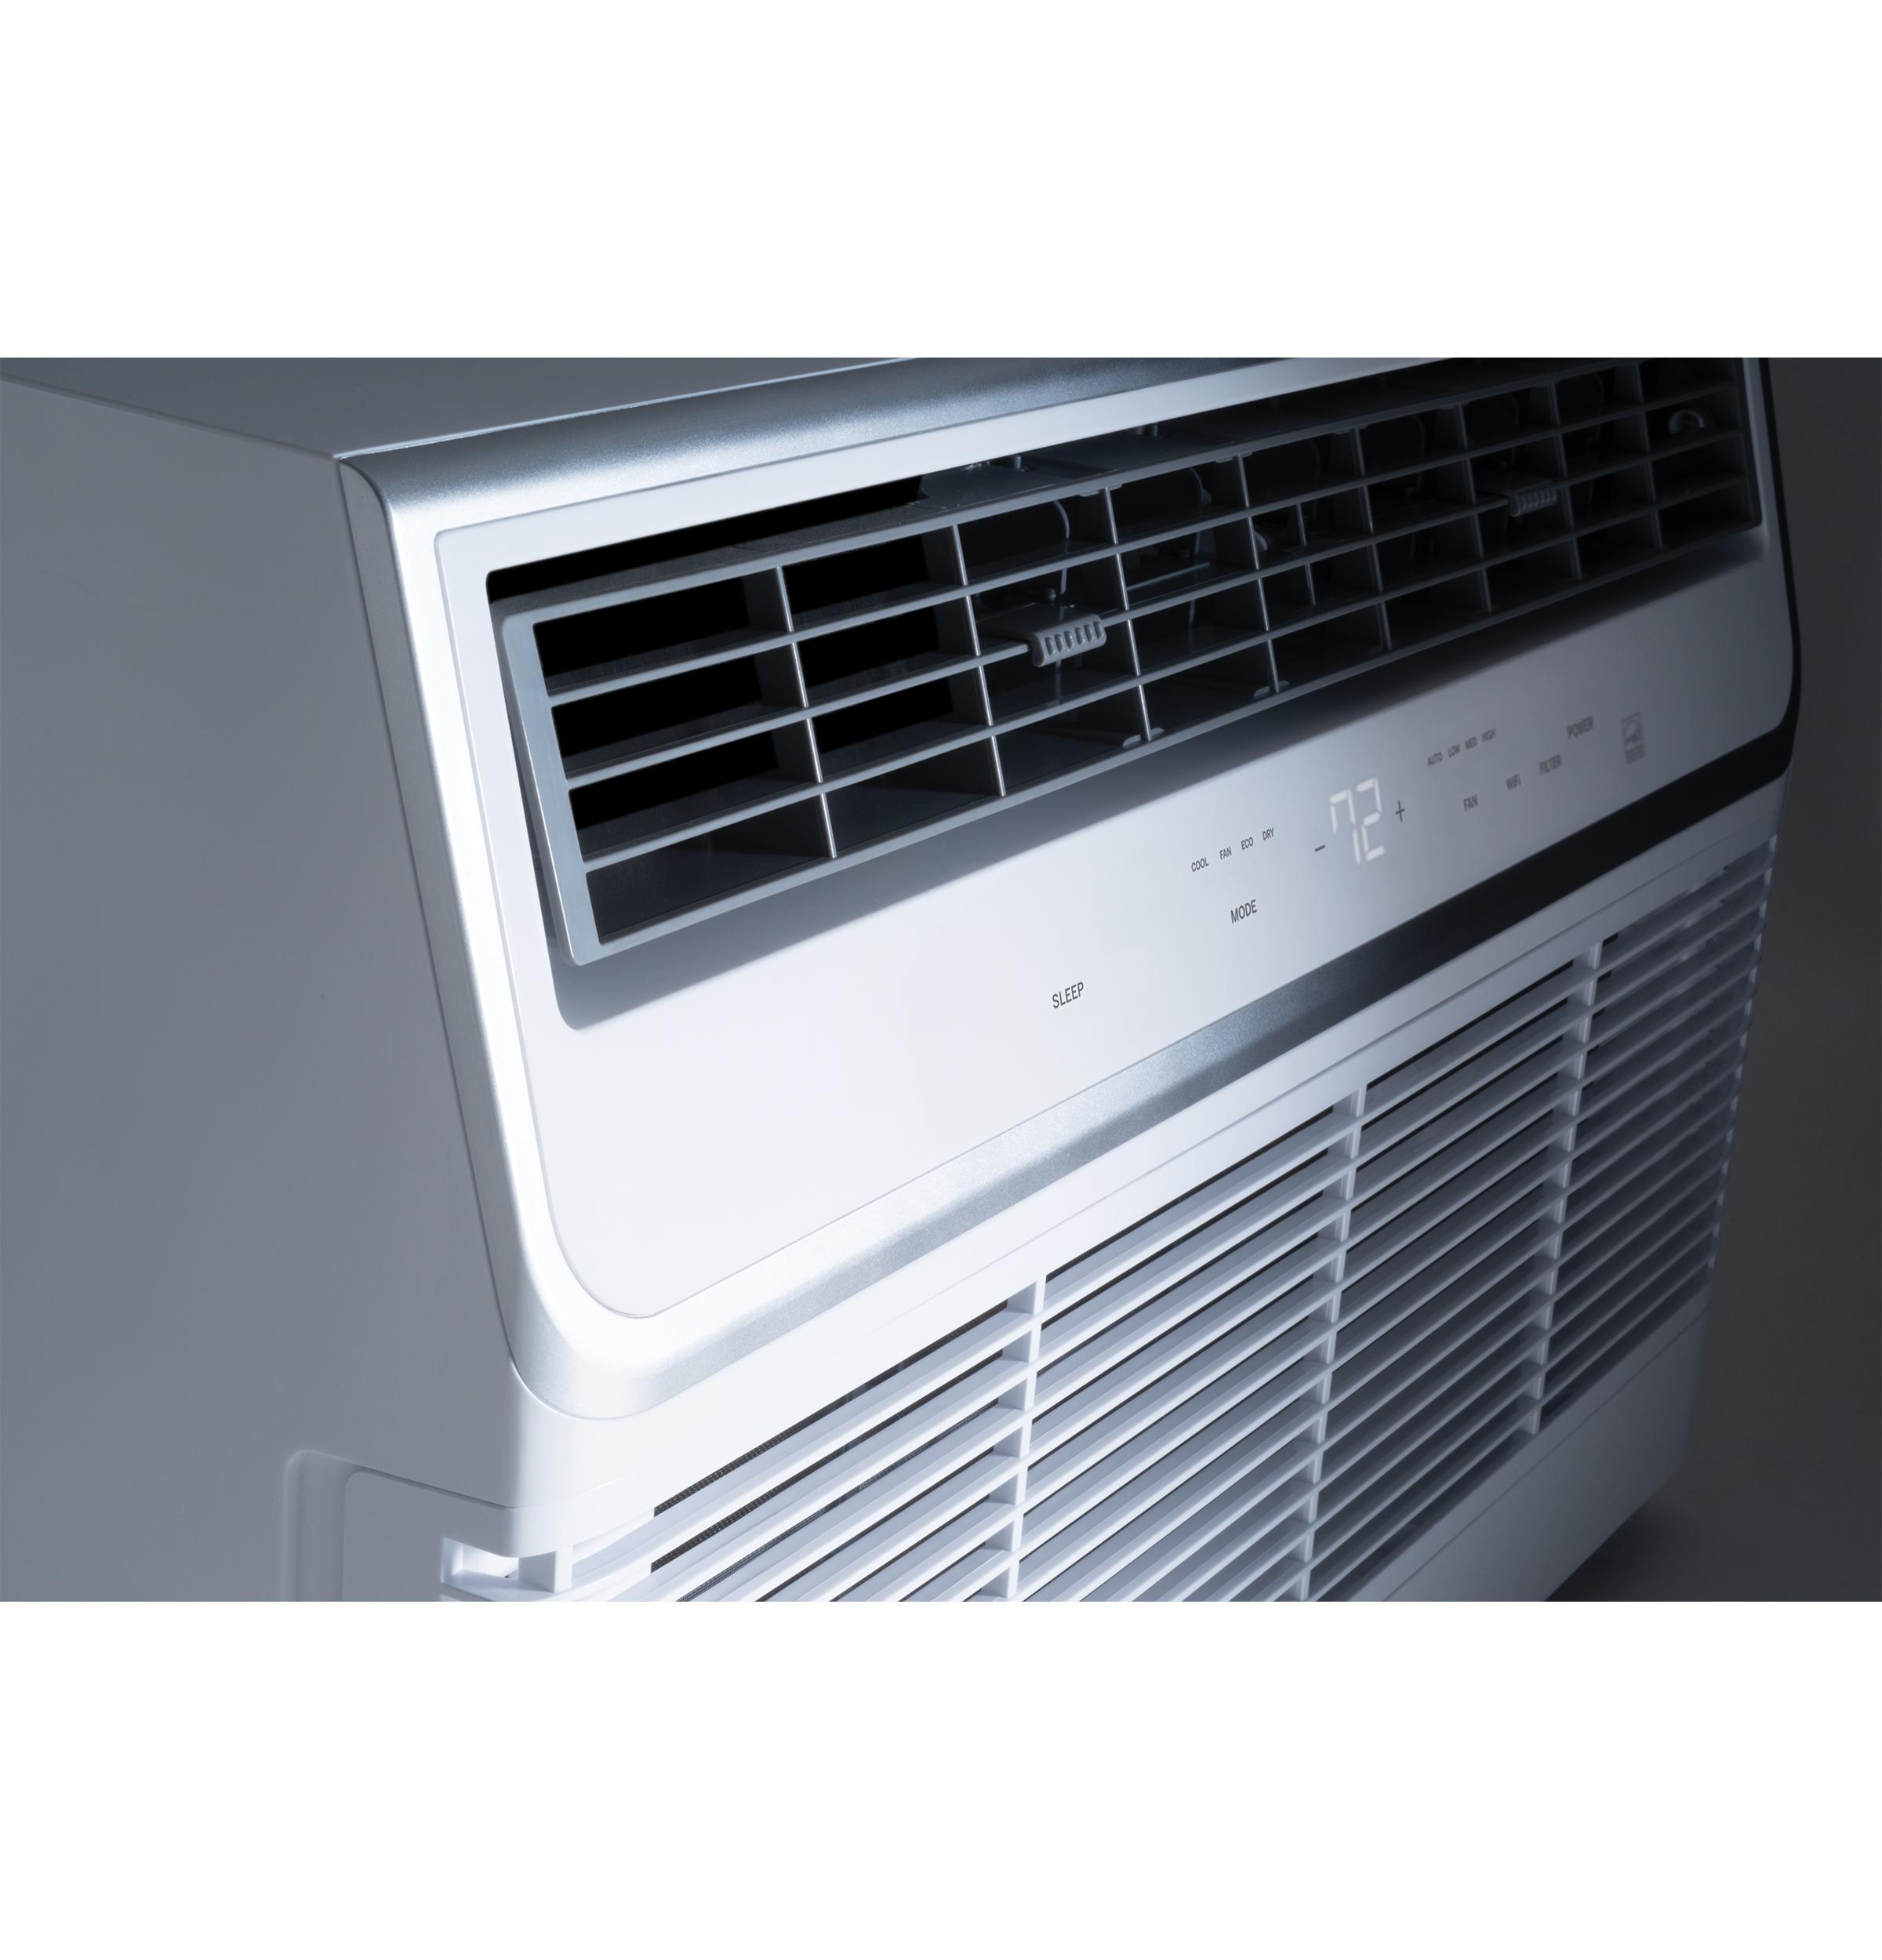 GE® 115 Volt Built-In Cool-Only 6,000 BTU Room Air Conditioner